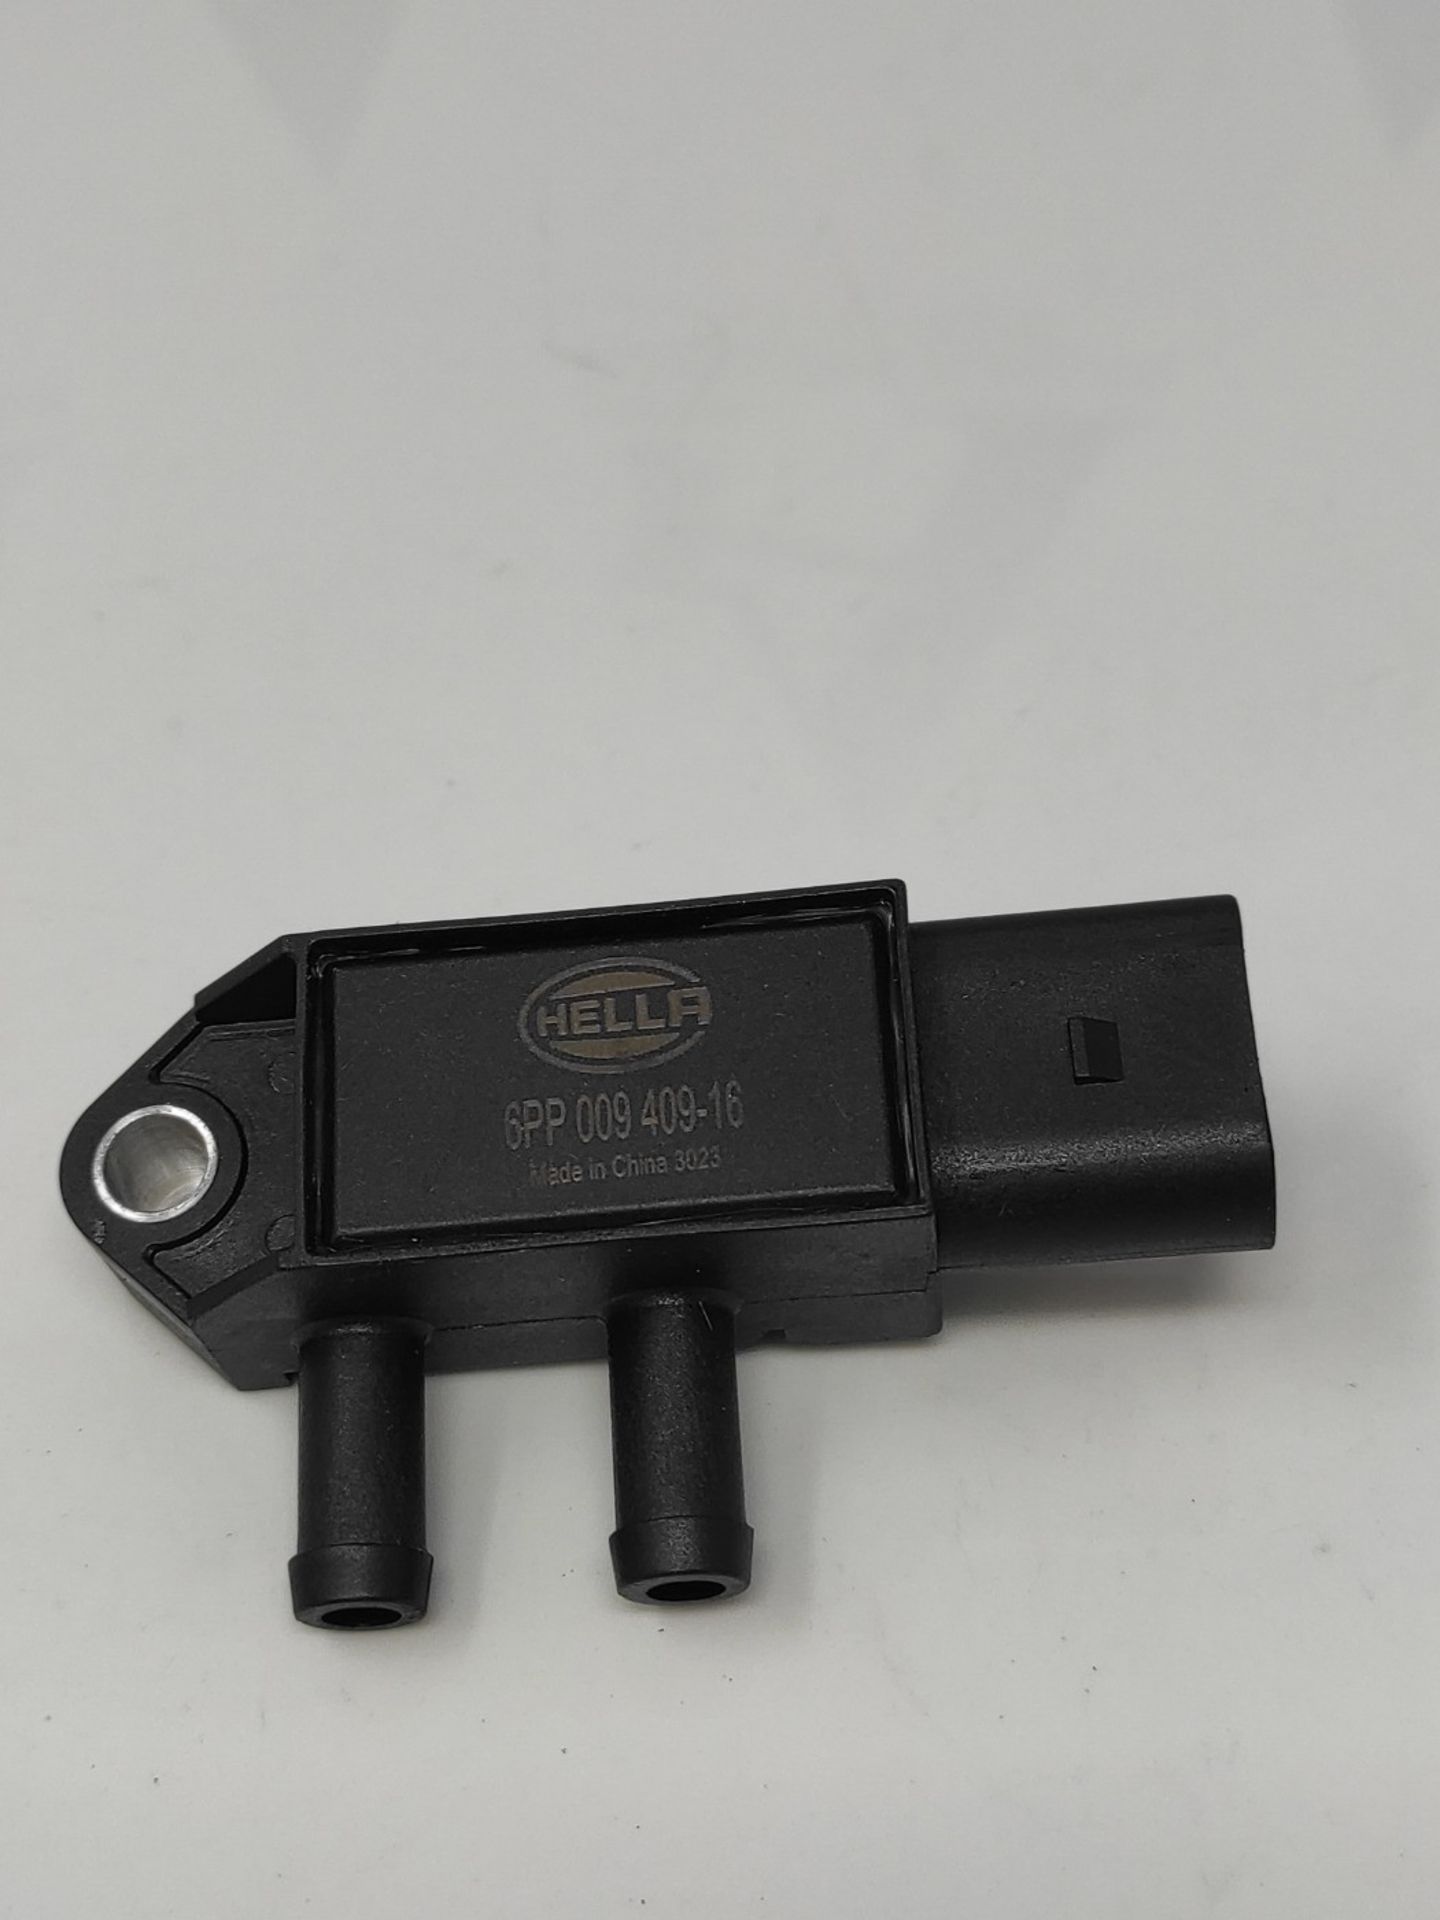 HELLA 6PP 009 409-161 Sensor, exhaust pressure - 3-pin connector - Bolted - Image 2 of 3